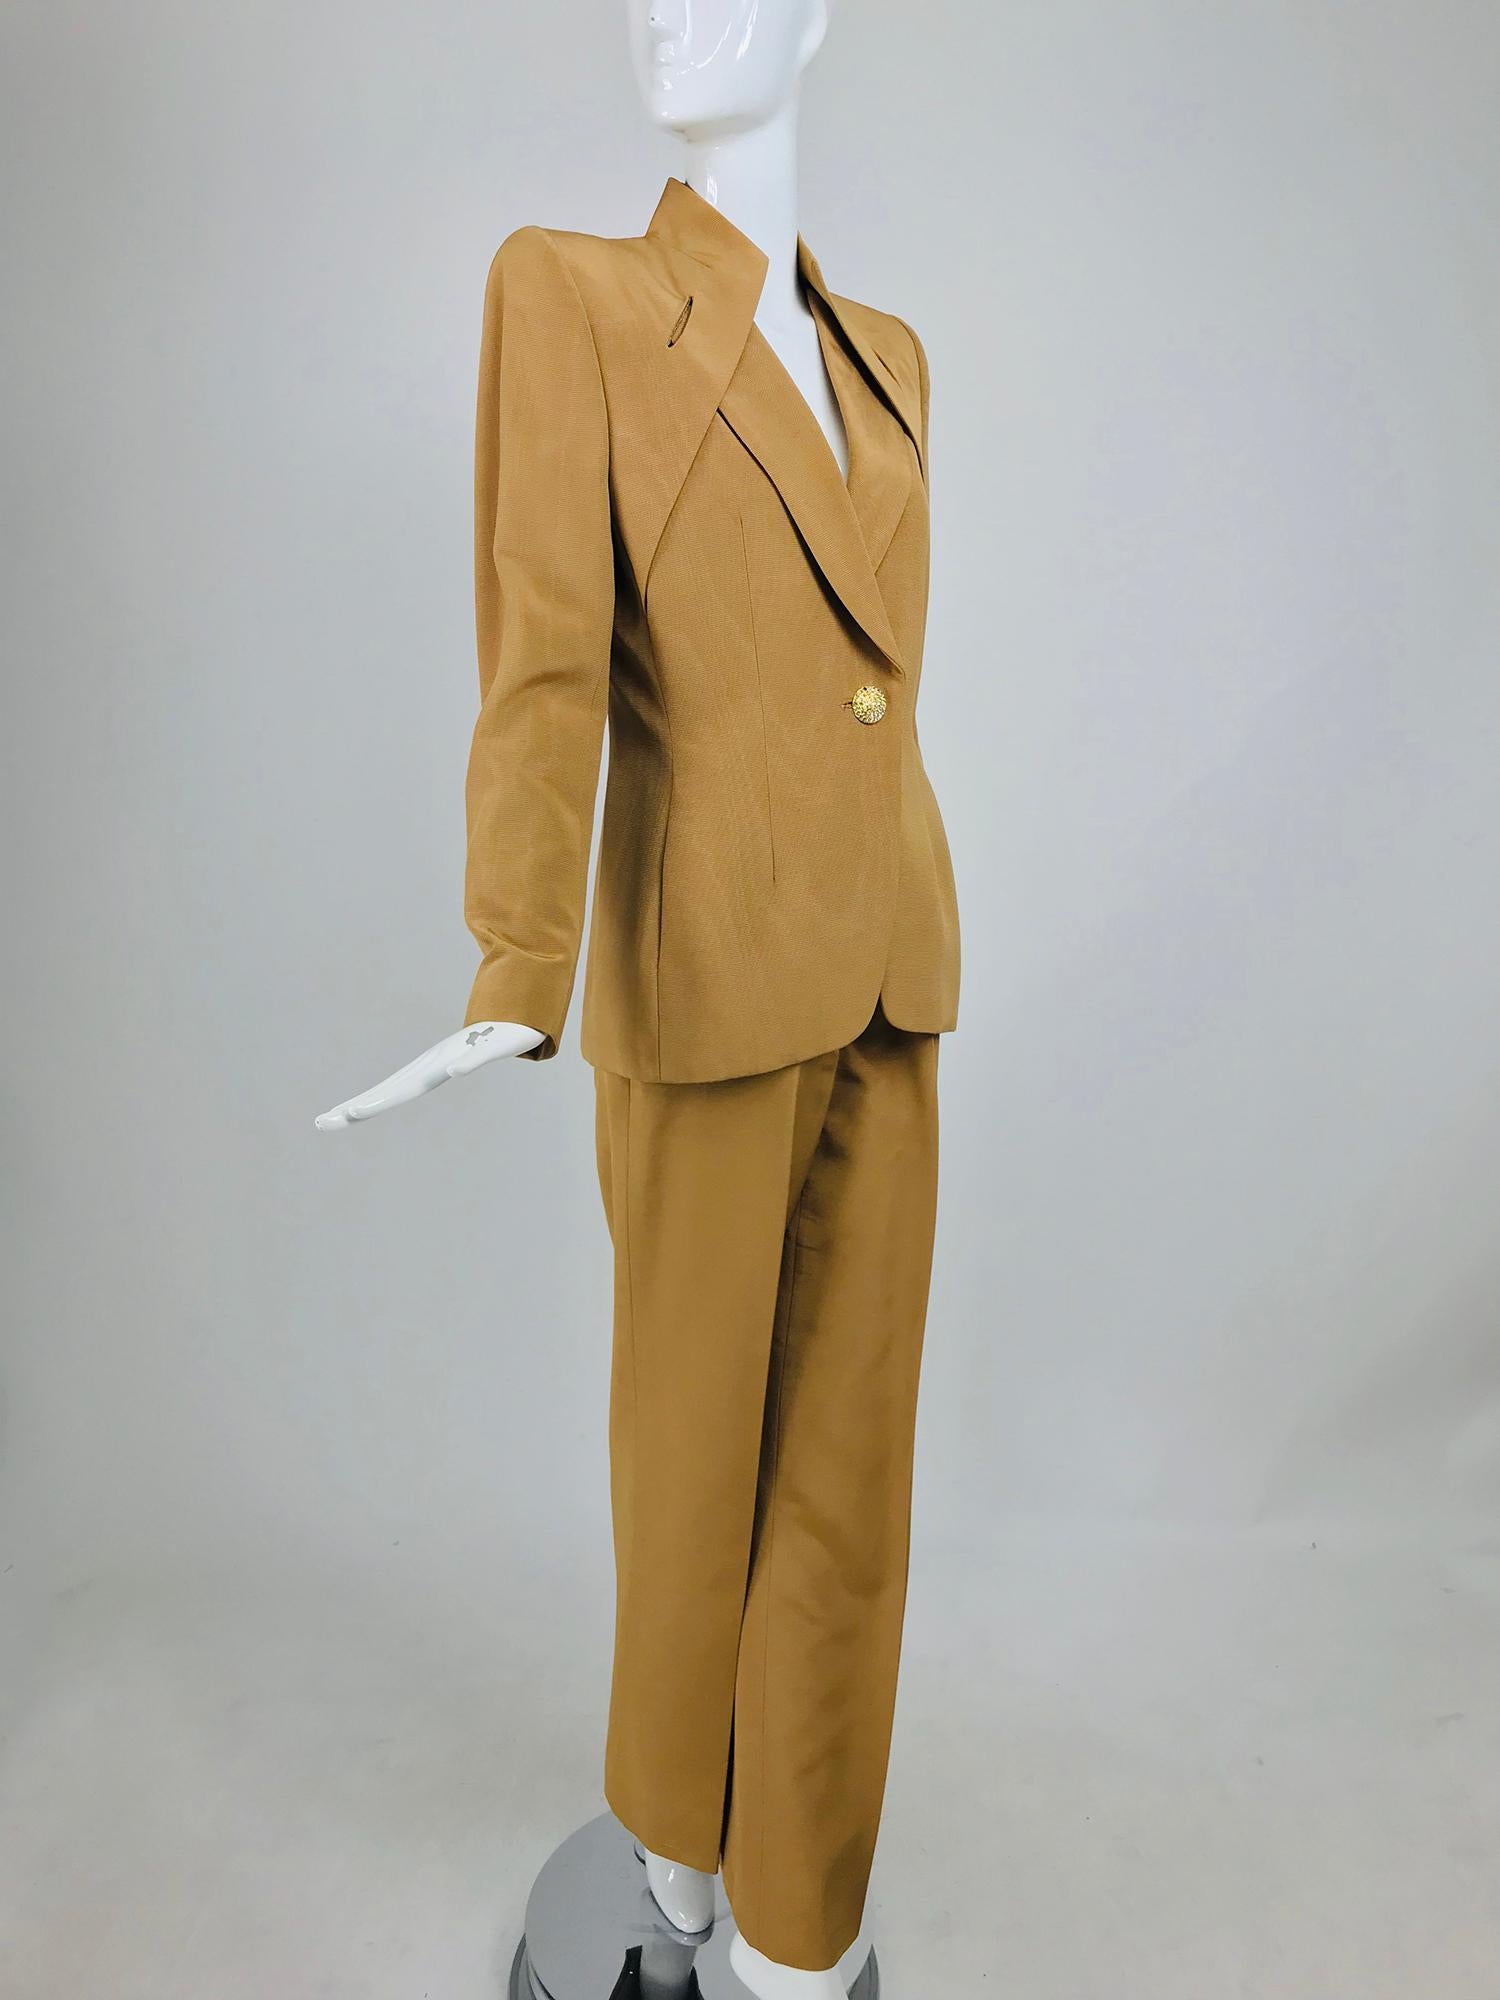 Givenchy Couture Gold Silk Ottoman Trouser Suit from the 1990s. Possibly designed by John galliano  during his short term at Givenchy, although this label states 